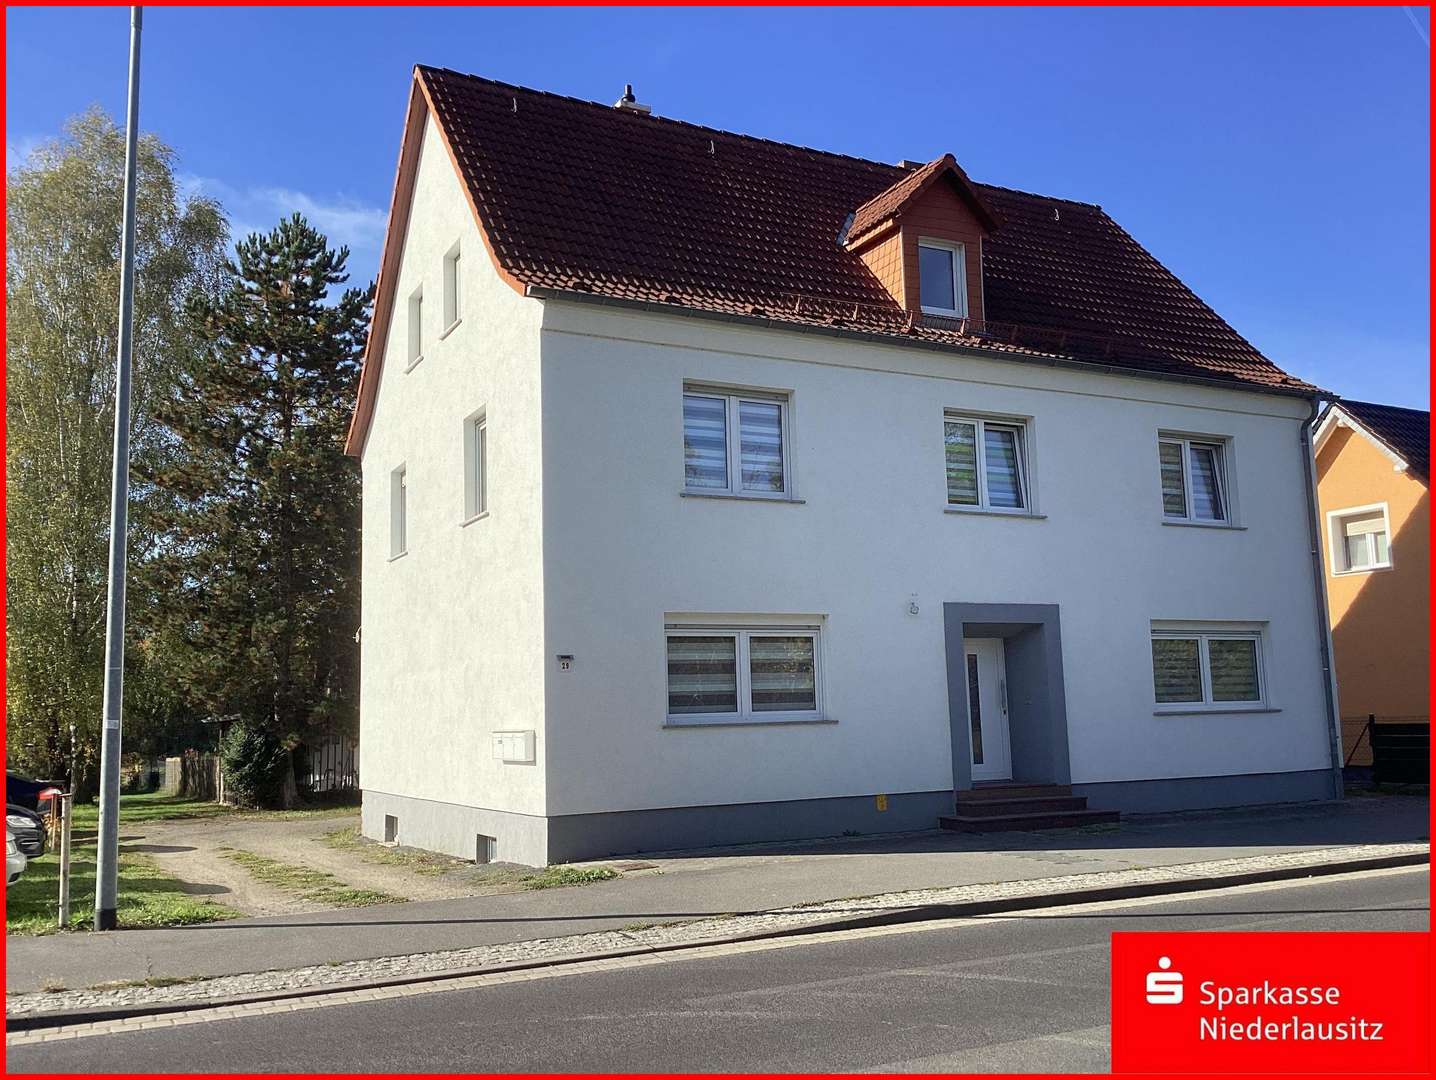 943CB023-A8E6-49BE-AF4F-319E357E0913 - Mehrfamilienhaus in 01979 Lauchhammer mit 243m² kaufen